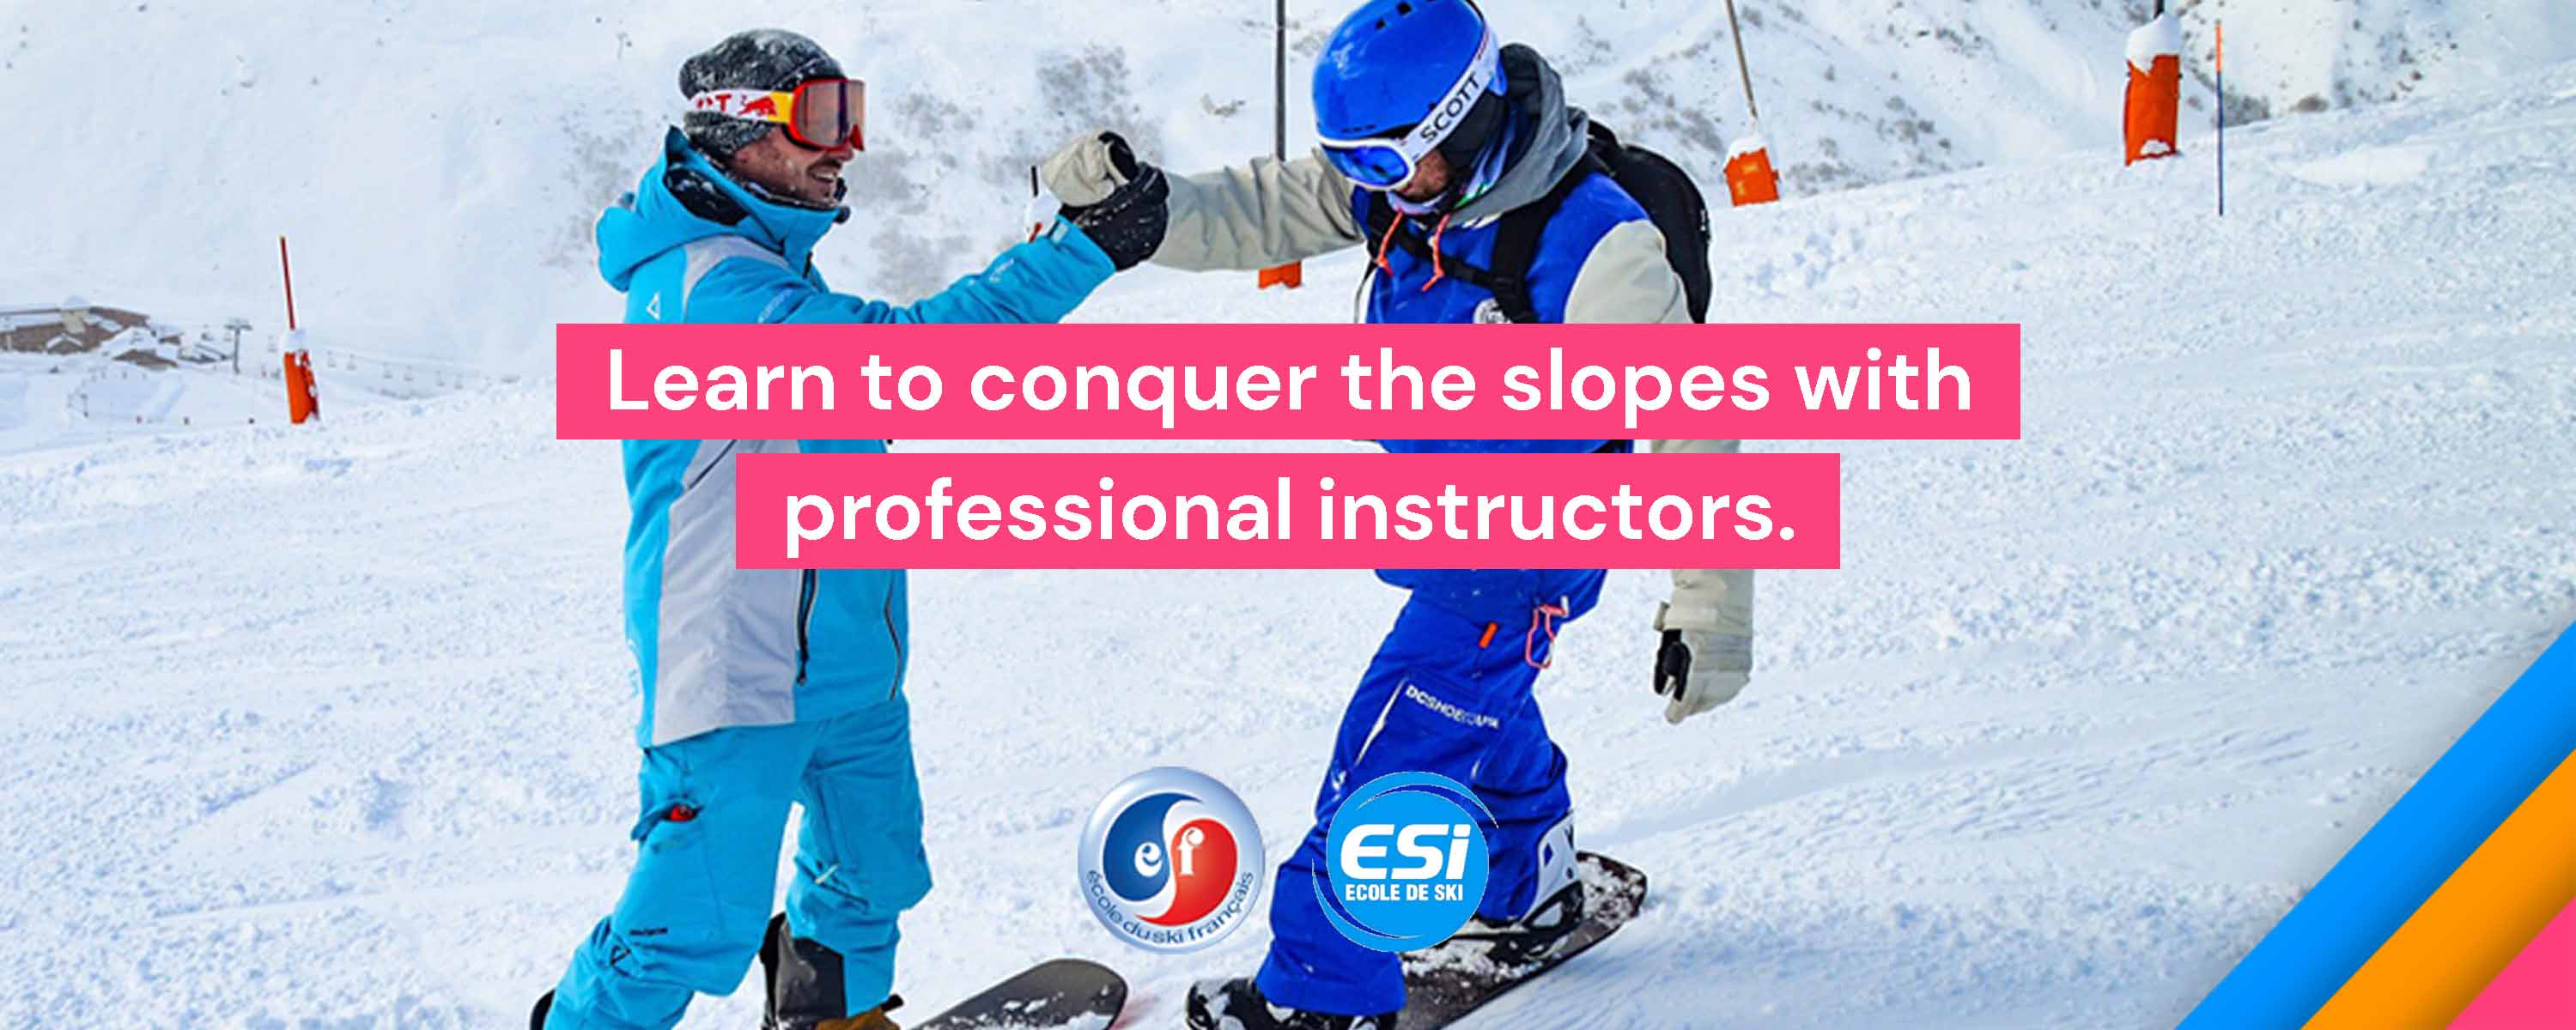 book ski lessons with esf and esi